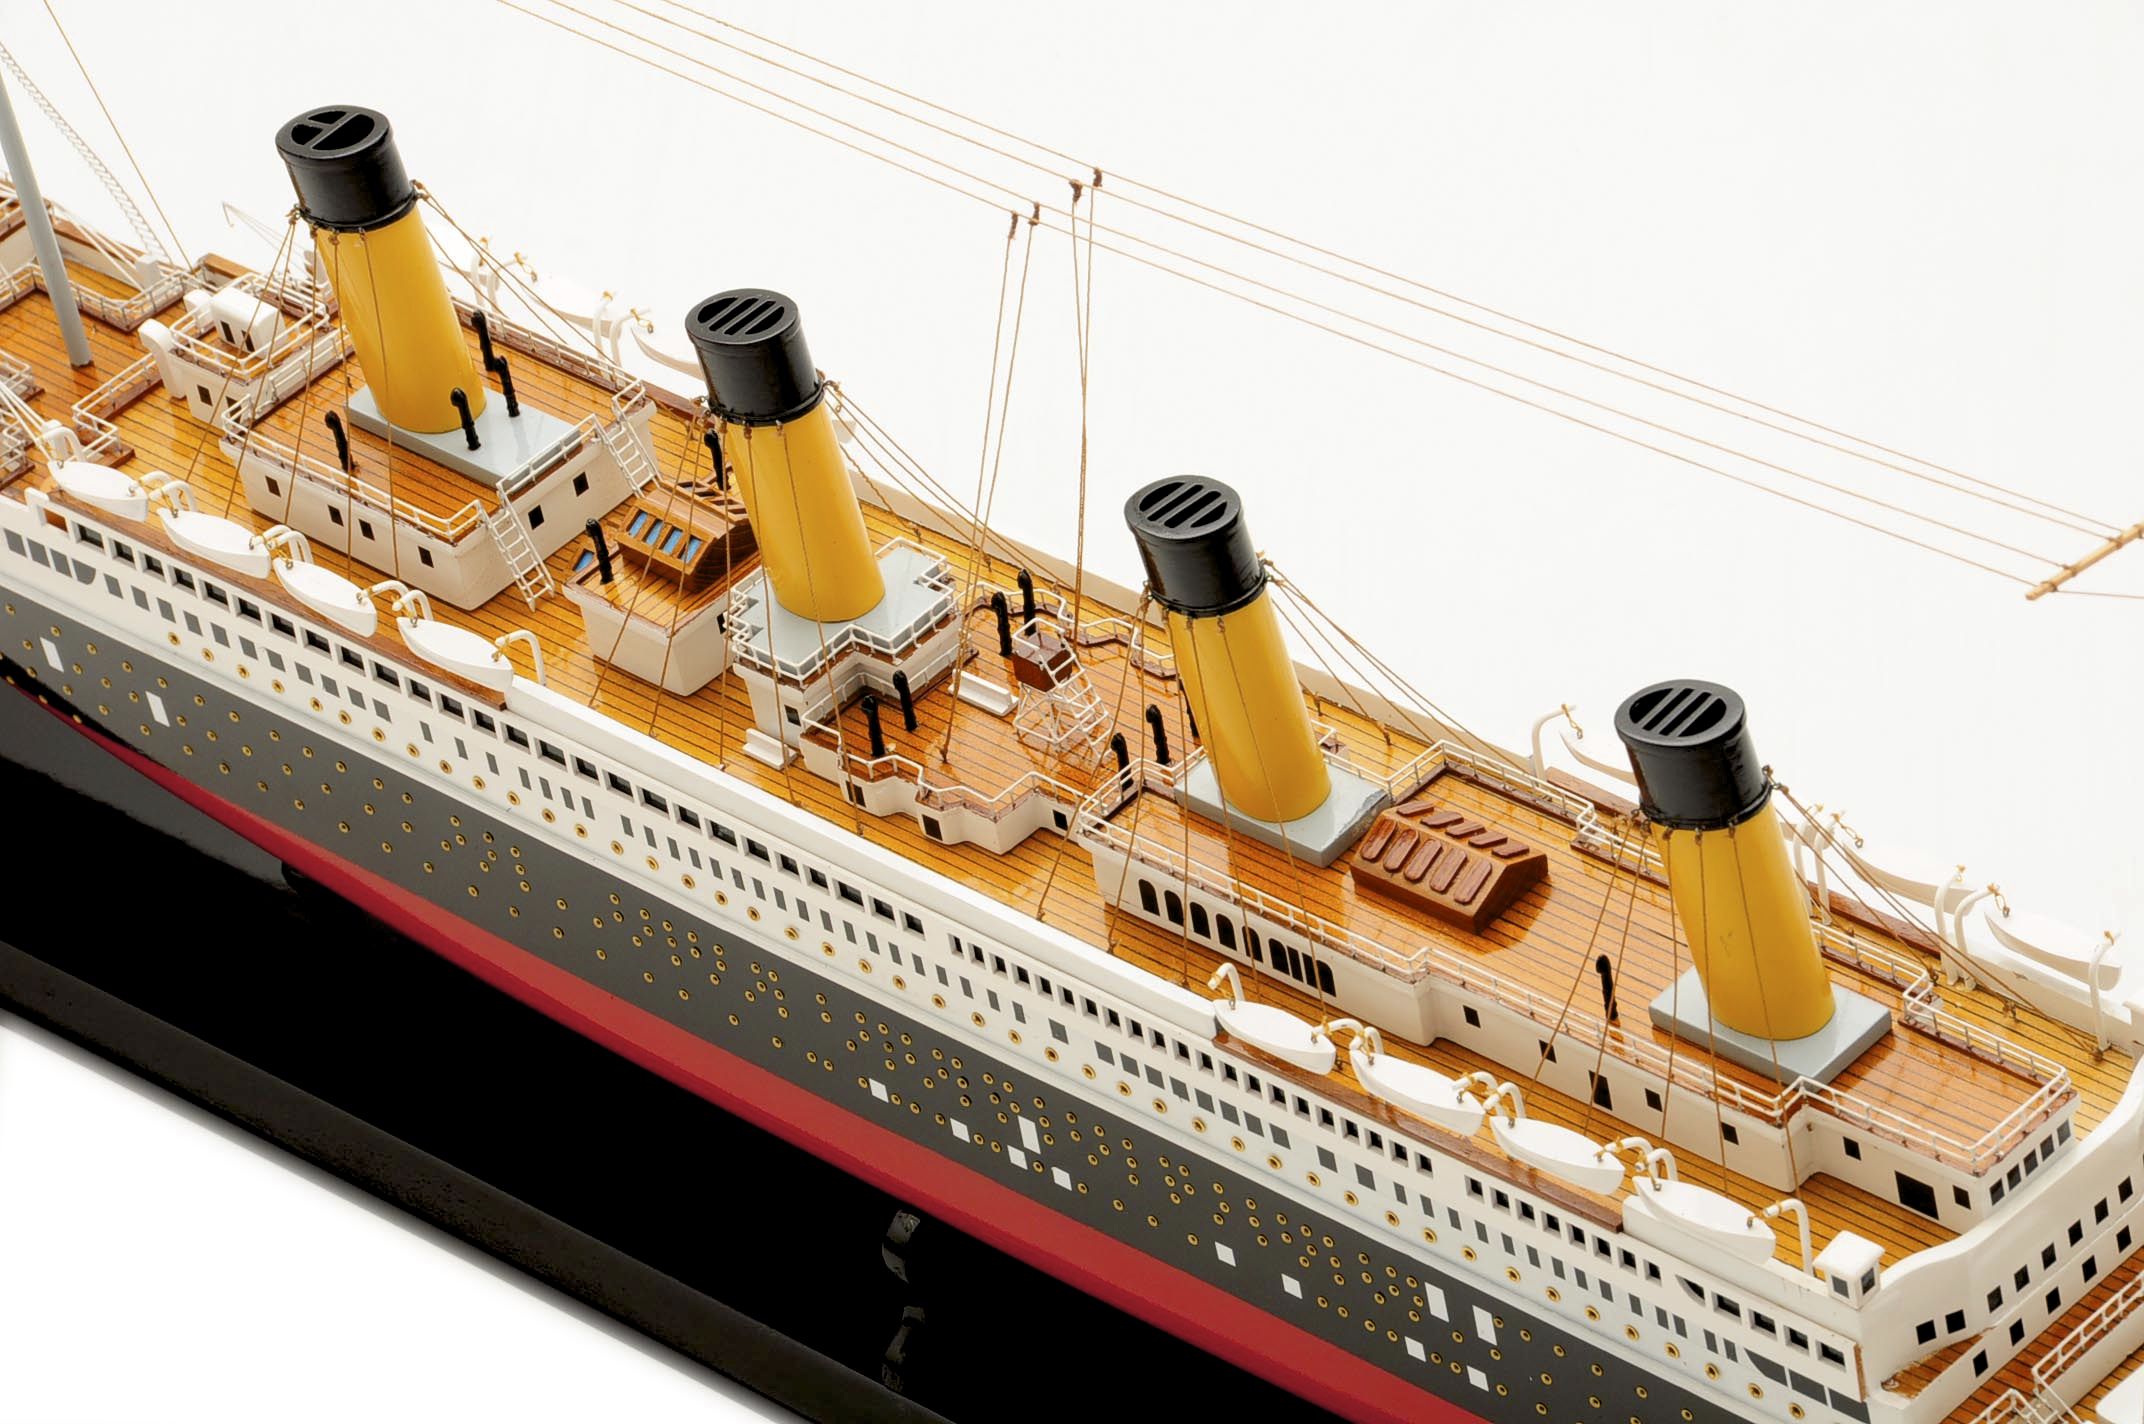 RMS Titanic Model ,handcrafted,ready made,wooden,tall ship,historical,cruise ship,superior range